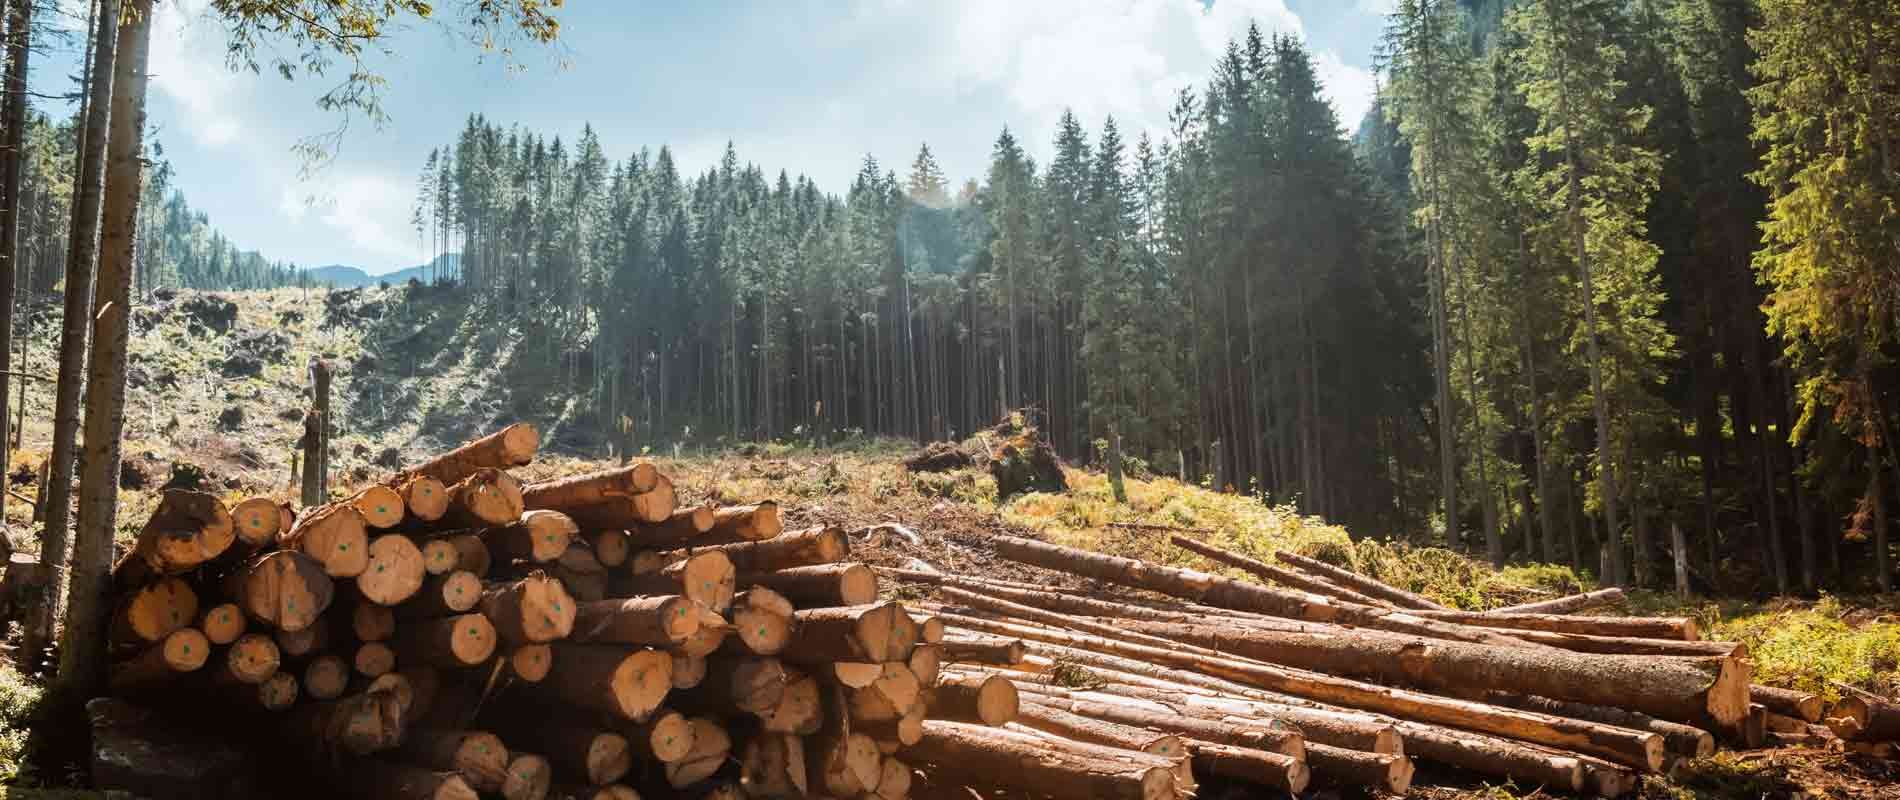 logging-forestry-lumber-commodity-pricing